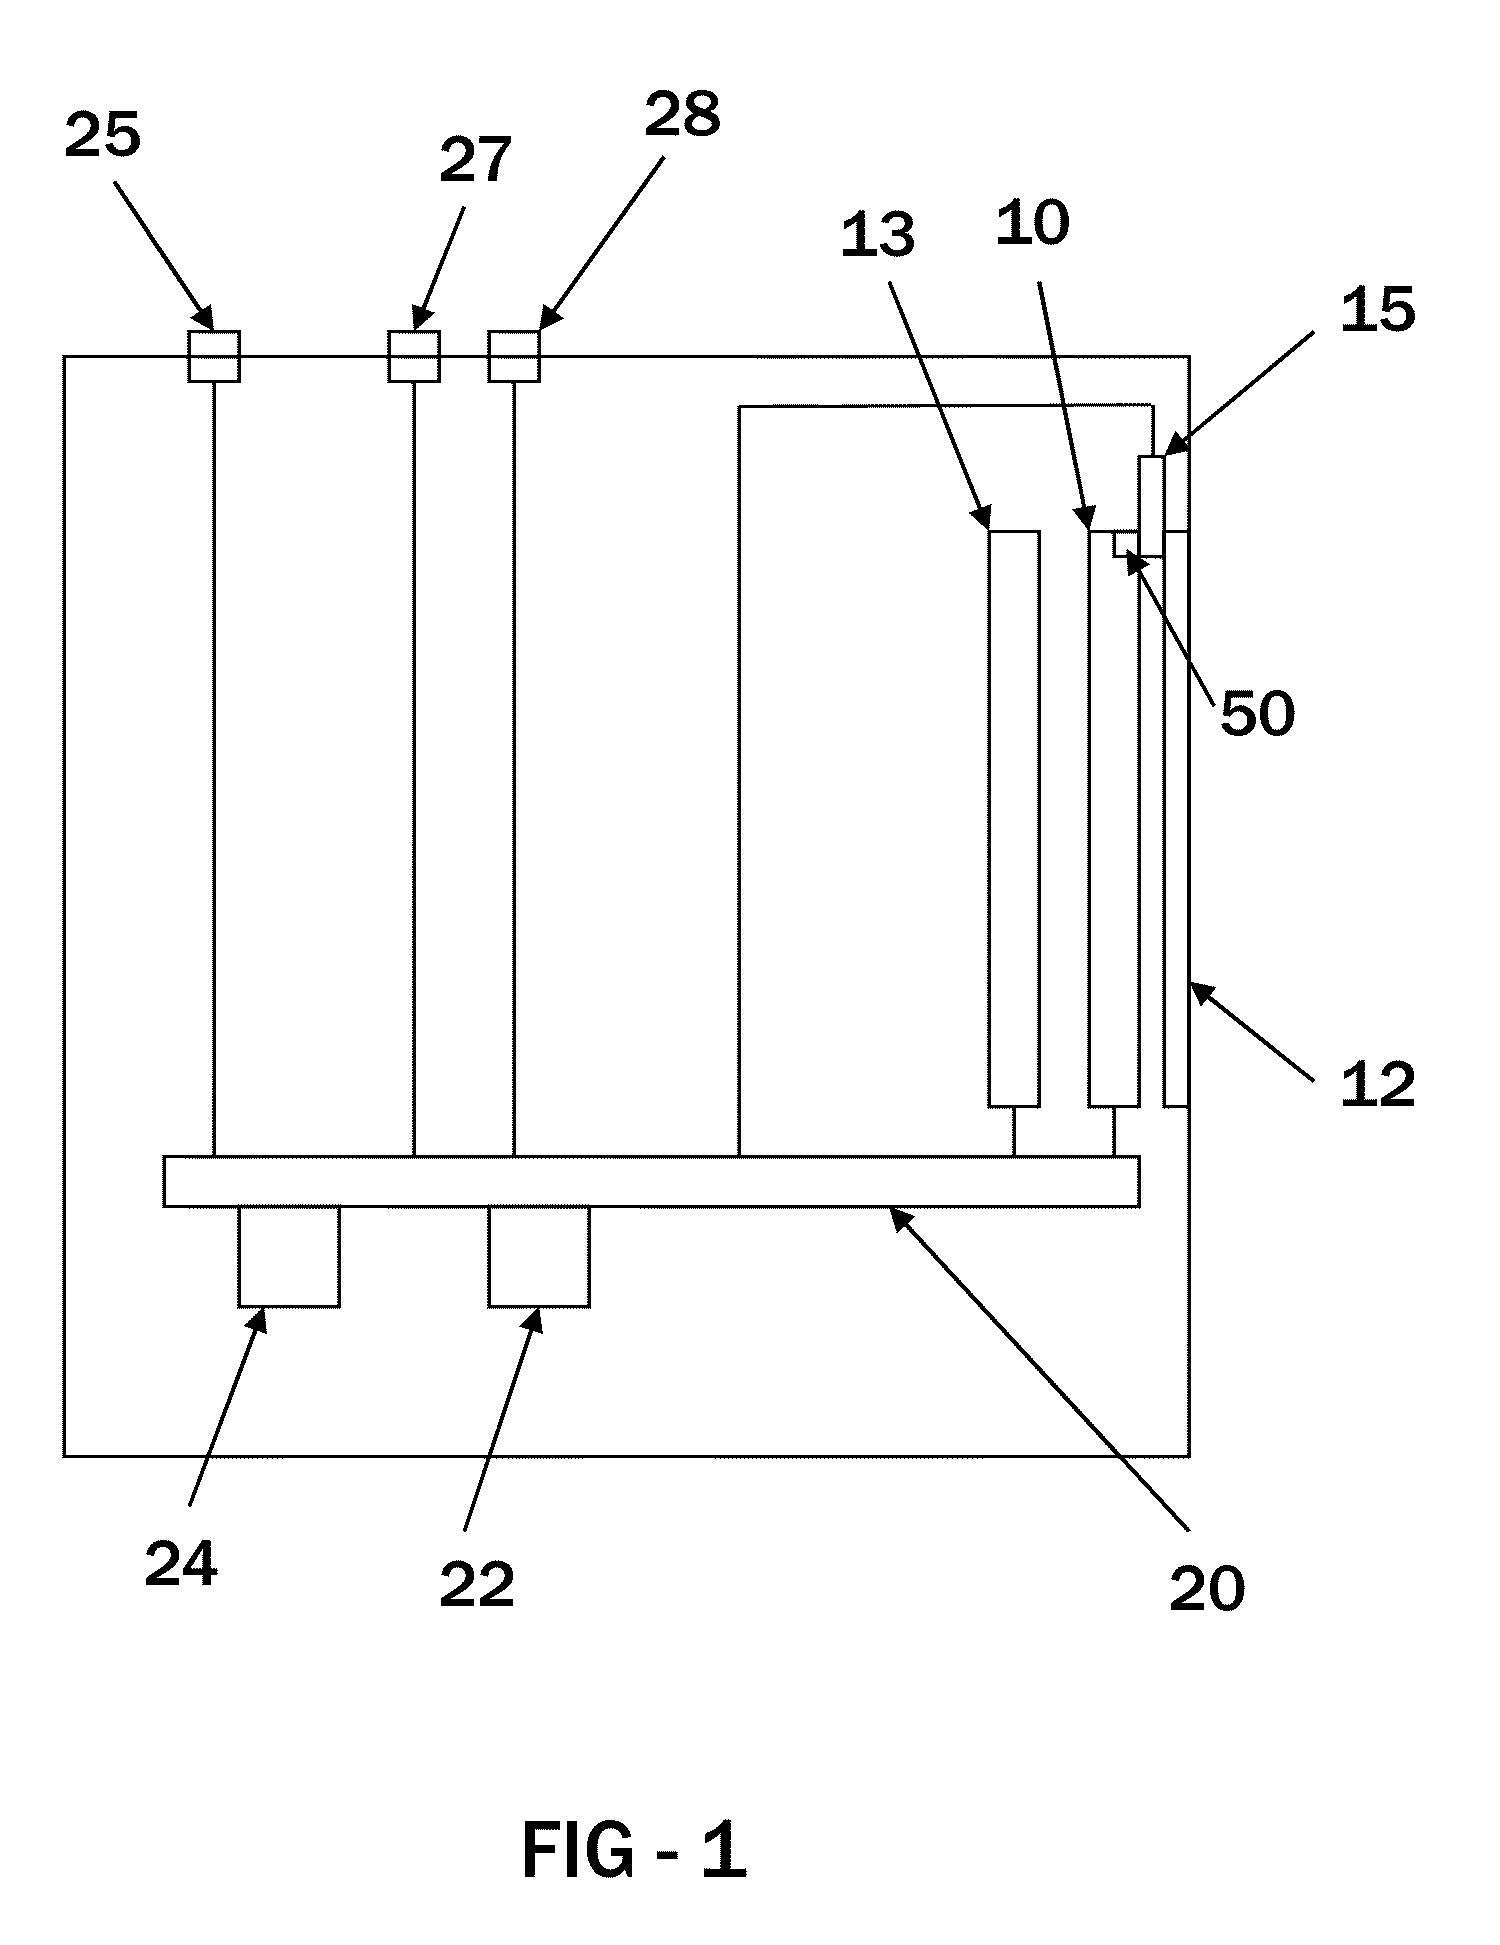 Visual Identifier for Images on an Electronic Display